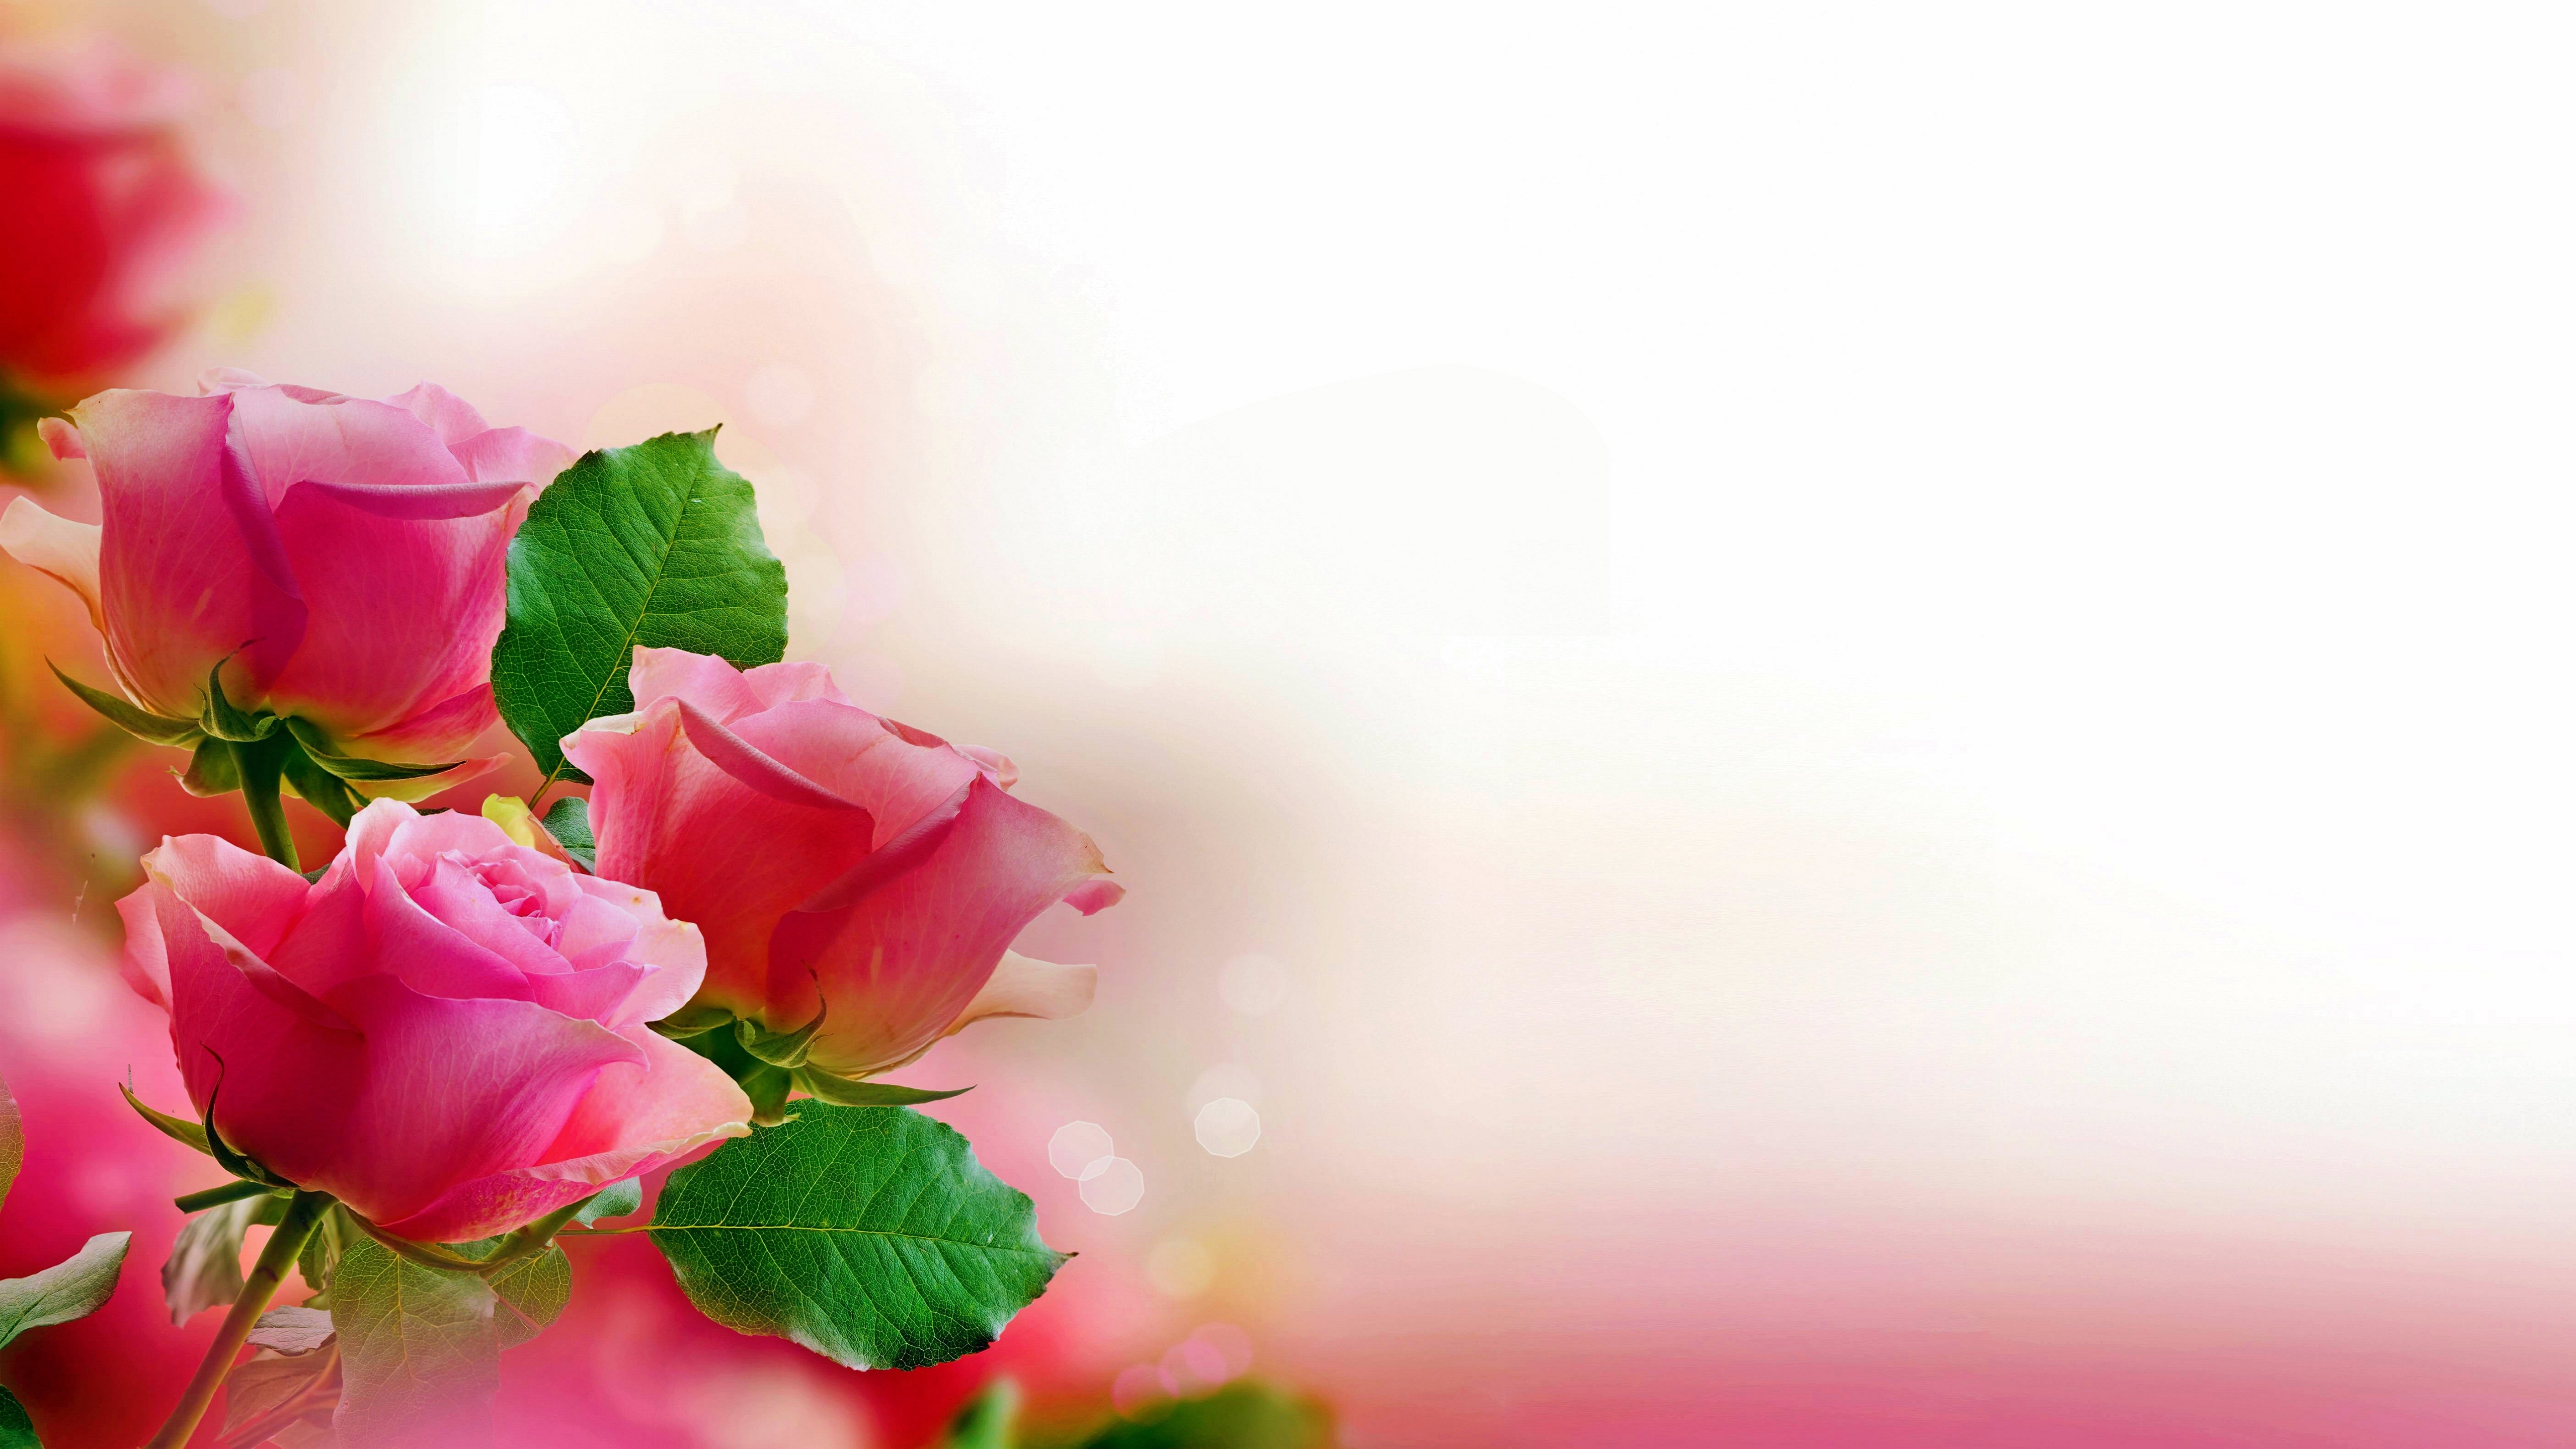 Pink Roses for 5120 x 2880 5K Ultra HD resolution